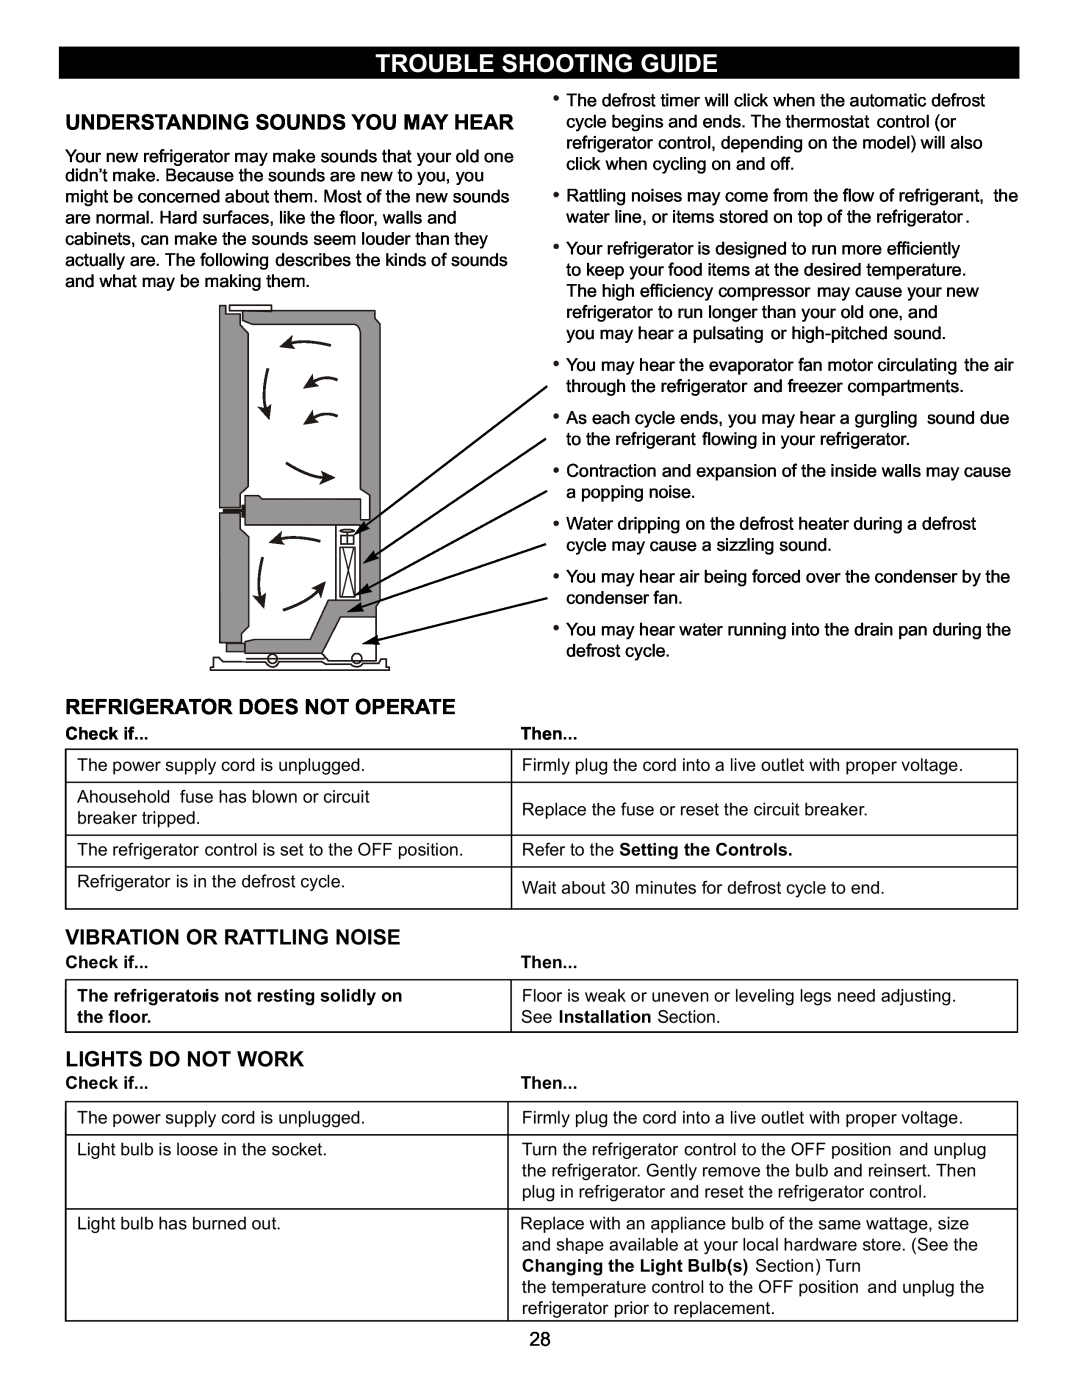 LG Electronics LFC23760 Trouble Shooting Guide, Understanding Sounds You May Hear, Refrigerator Does Not Operate 